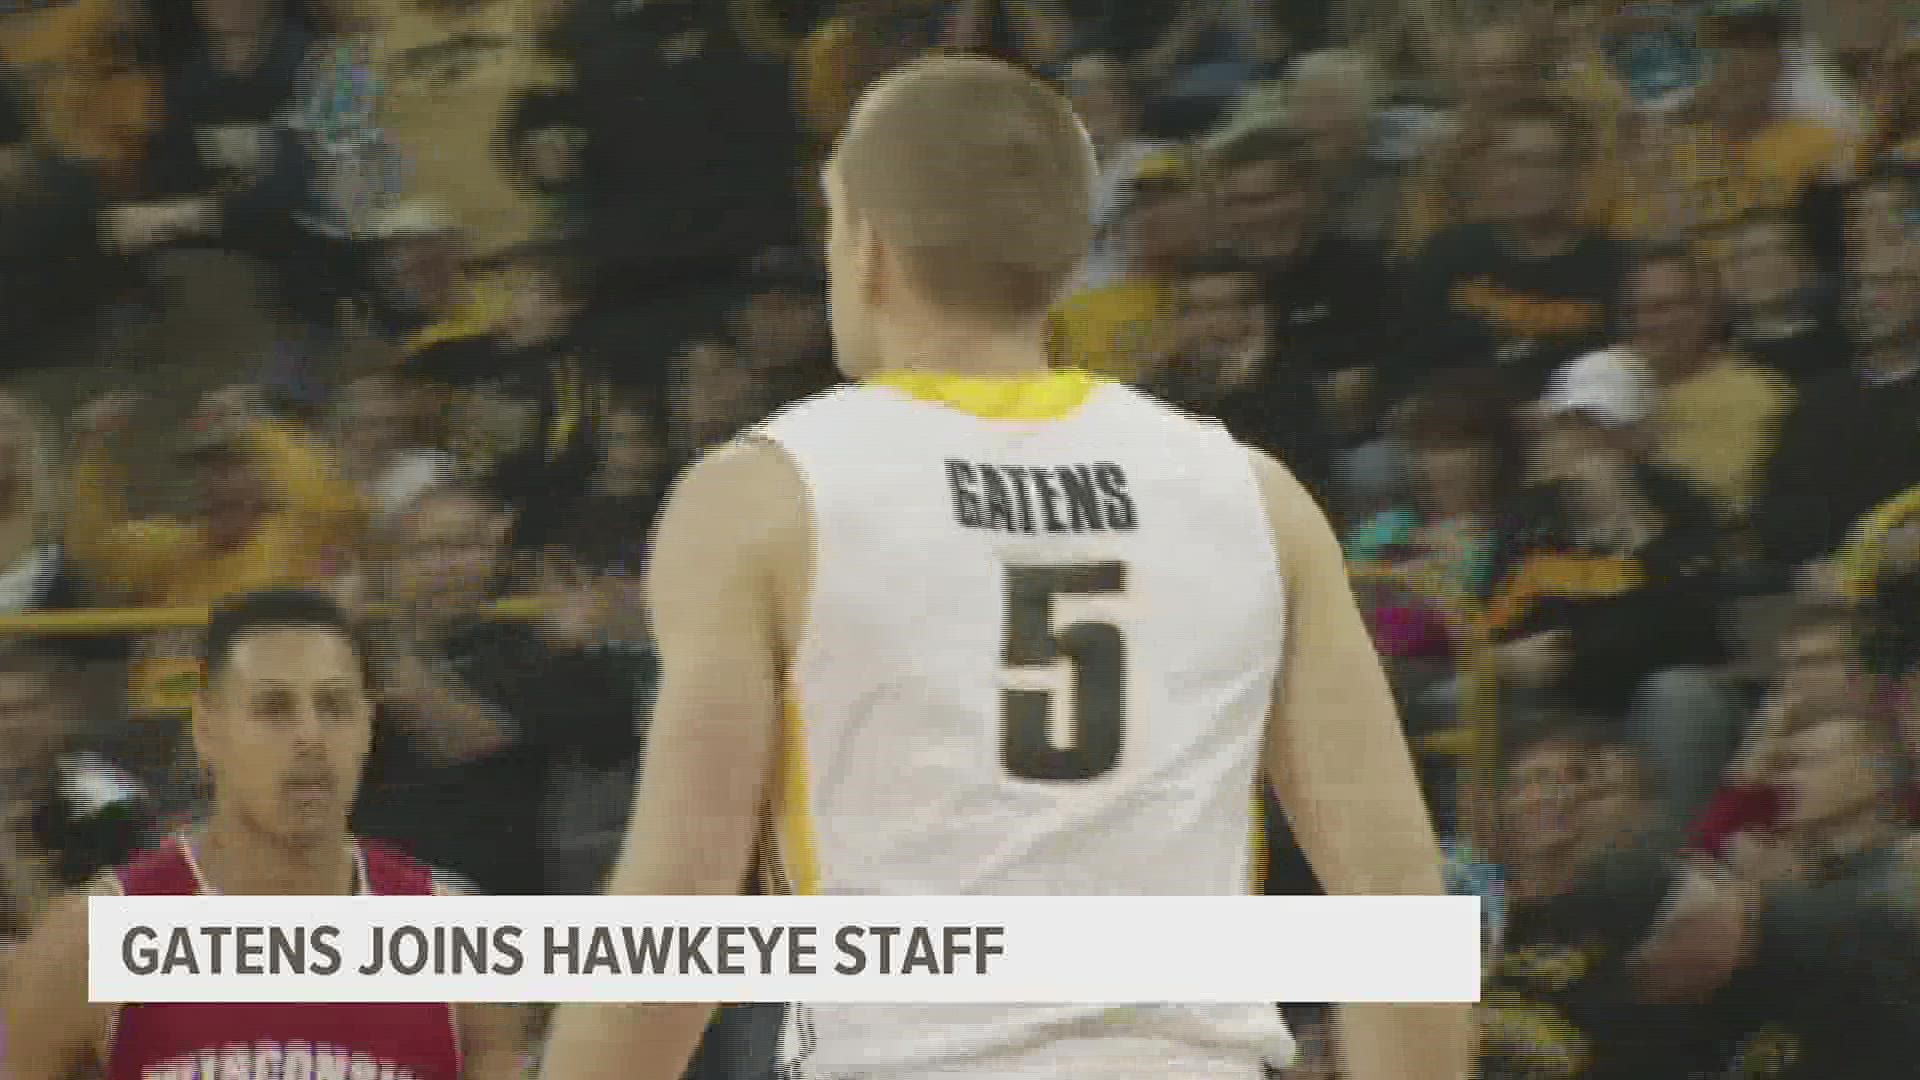 Gatens was Iowa's “Mr. Basketball” as a senior at Iowa City High in 2008. He played overseas and in the NBA Development League before starting his coaching career.